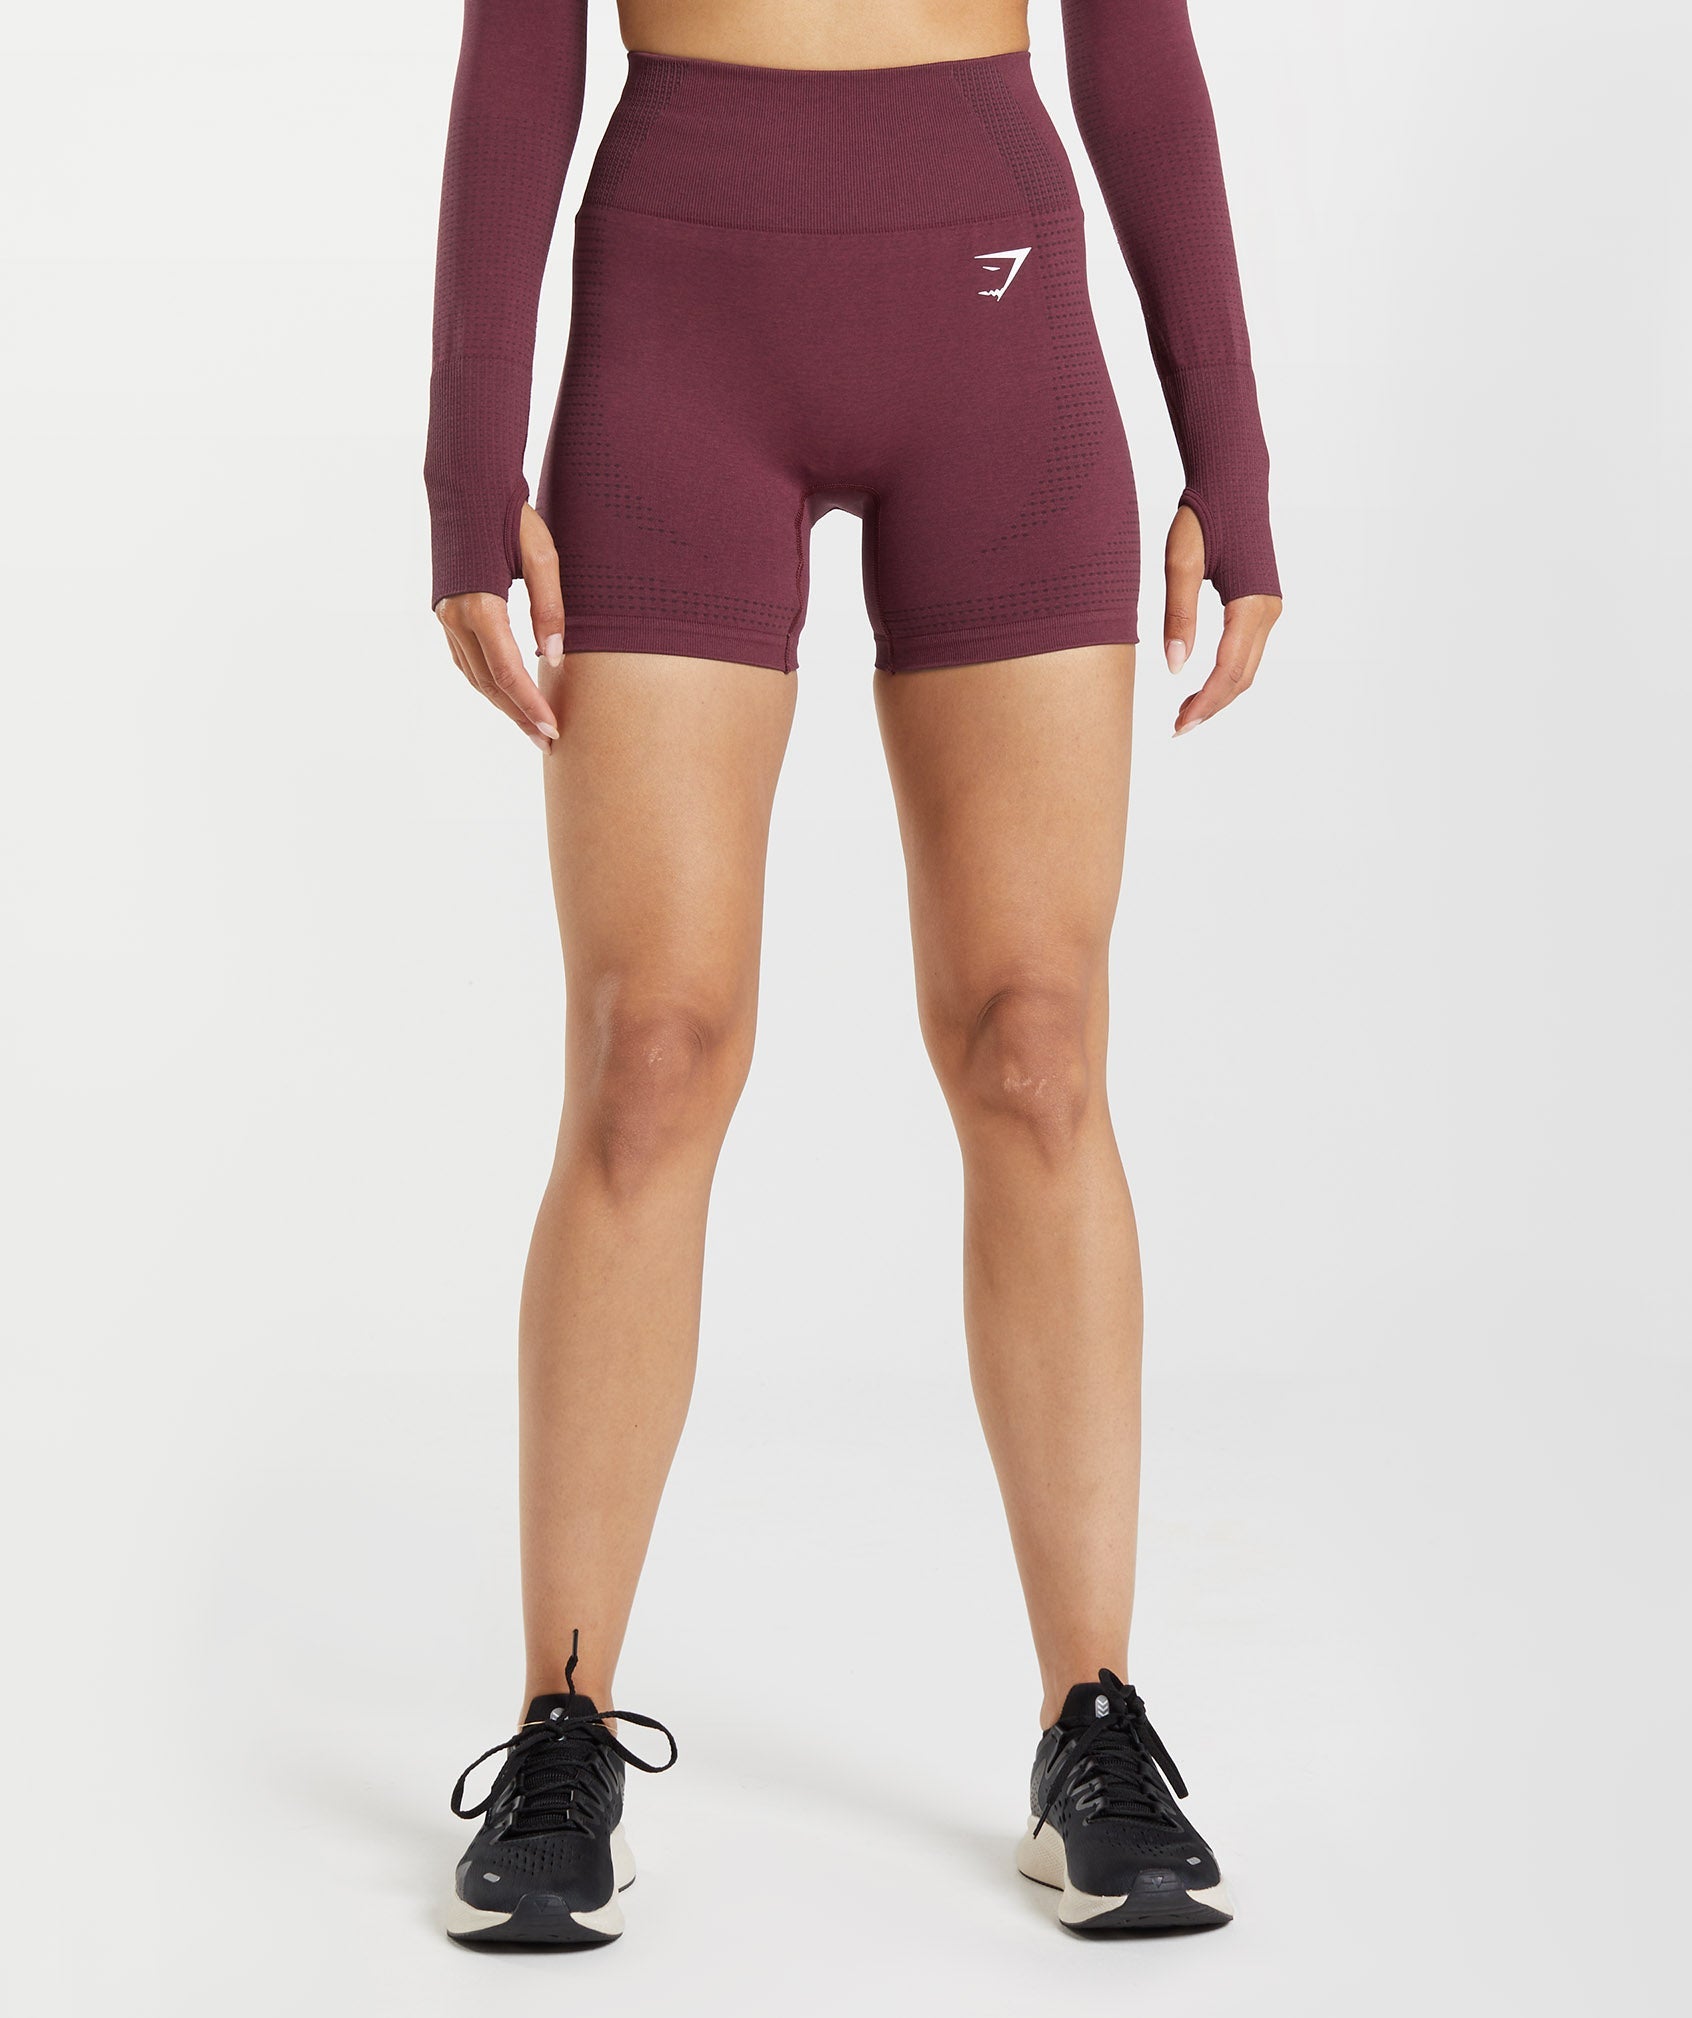 EVERYTHING MUST GO Gymshark ADAPT OMBRE SEAMLESS - Cycling Shorts - Women's  - burgundy marl/burgundy - Private Sport Shop